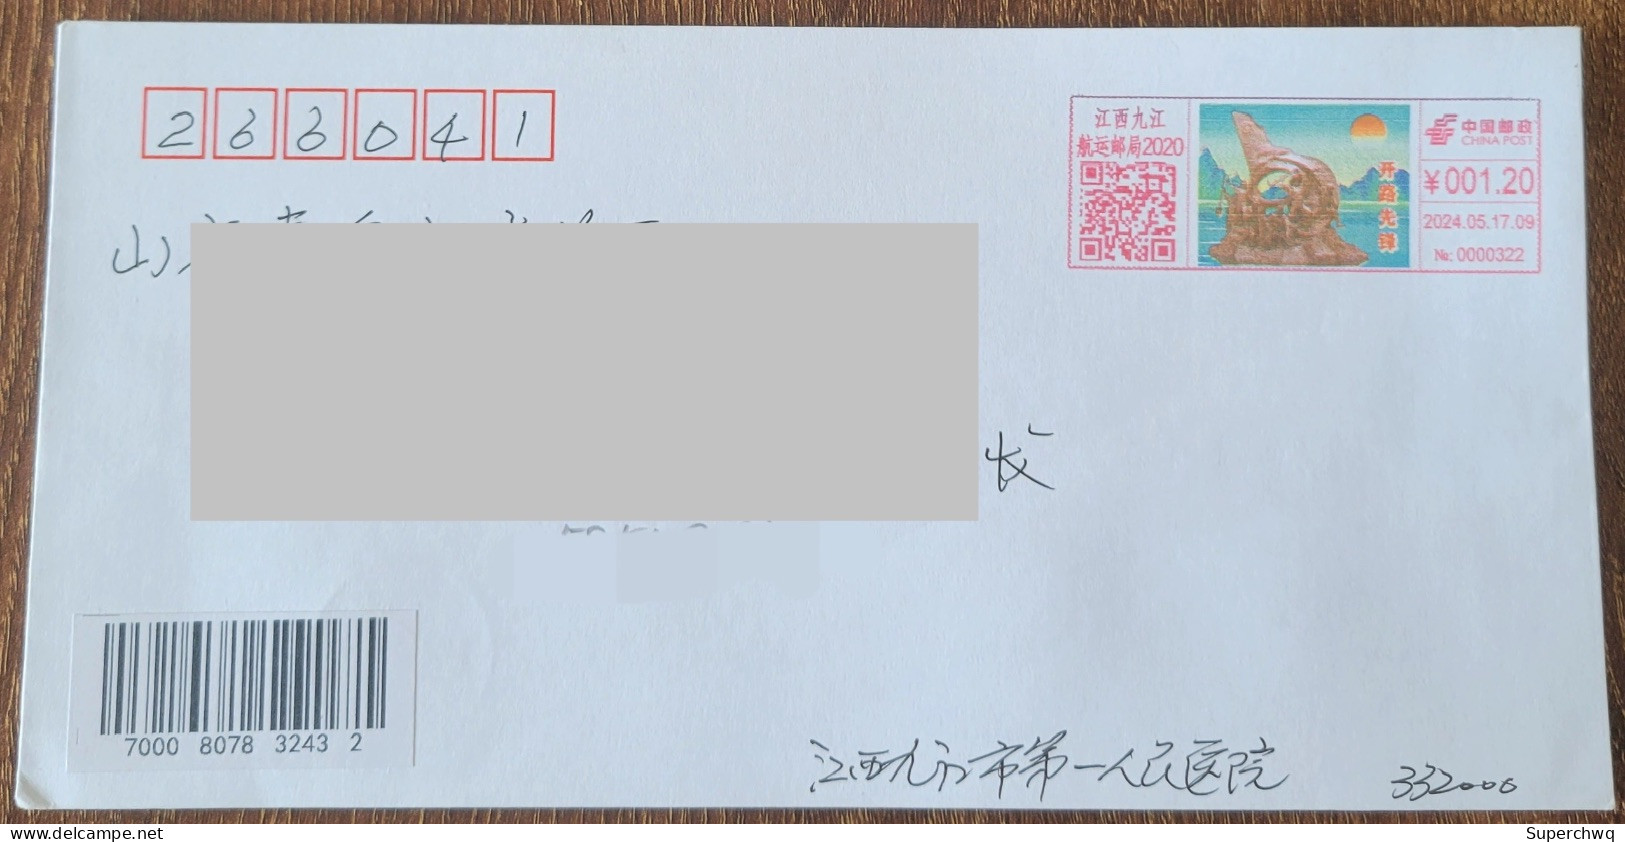 China Cover "Pioneer" (Jiujiang, Jiangxi) Colored Postage Machine Stamp First Day Actual Mail Seal - Covers